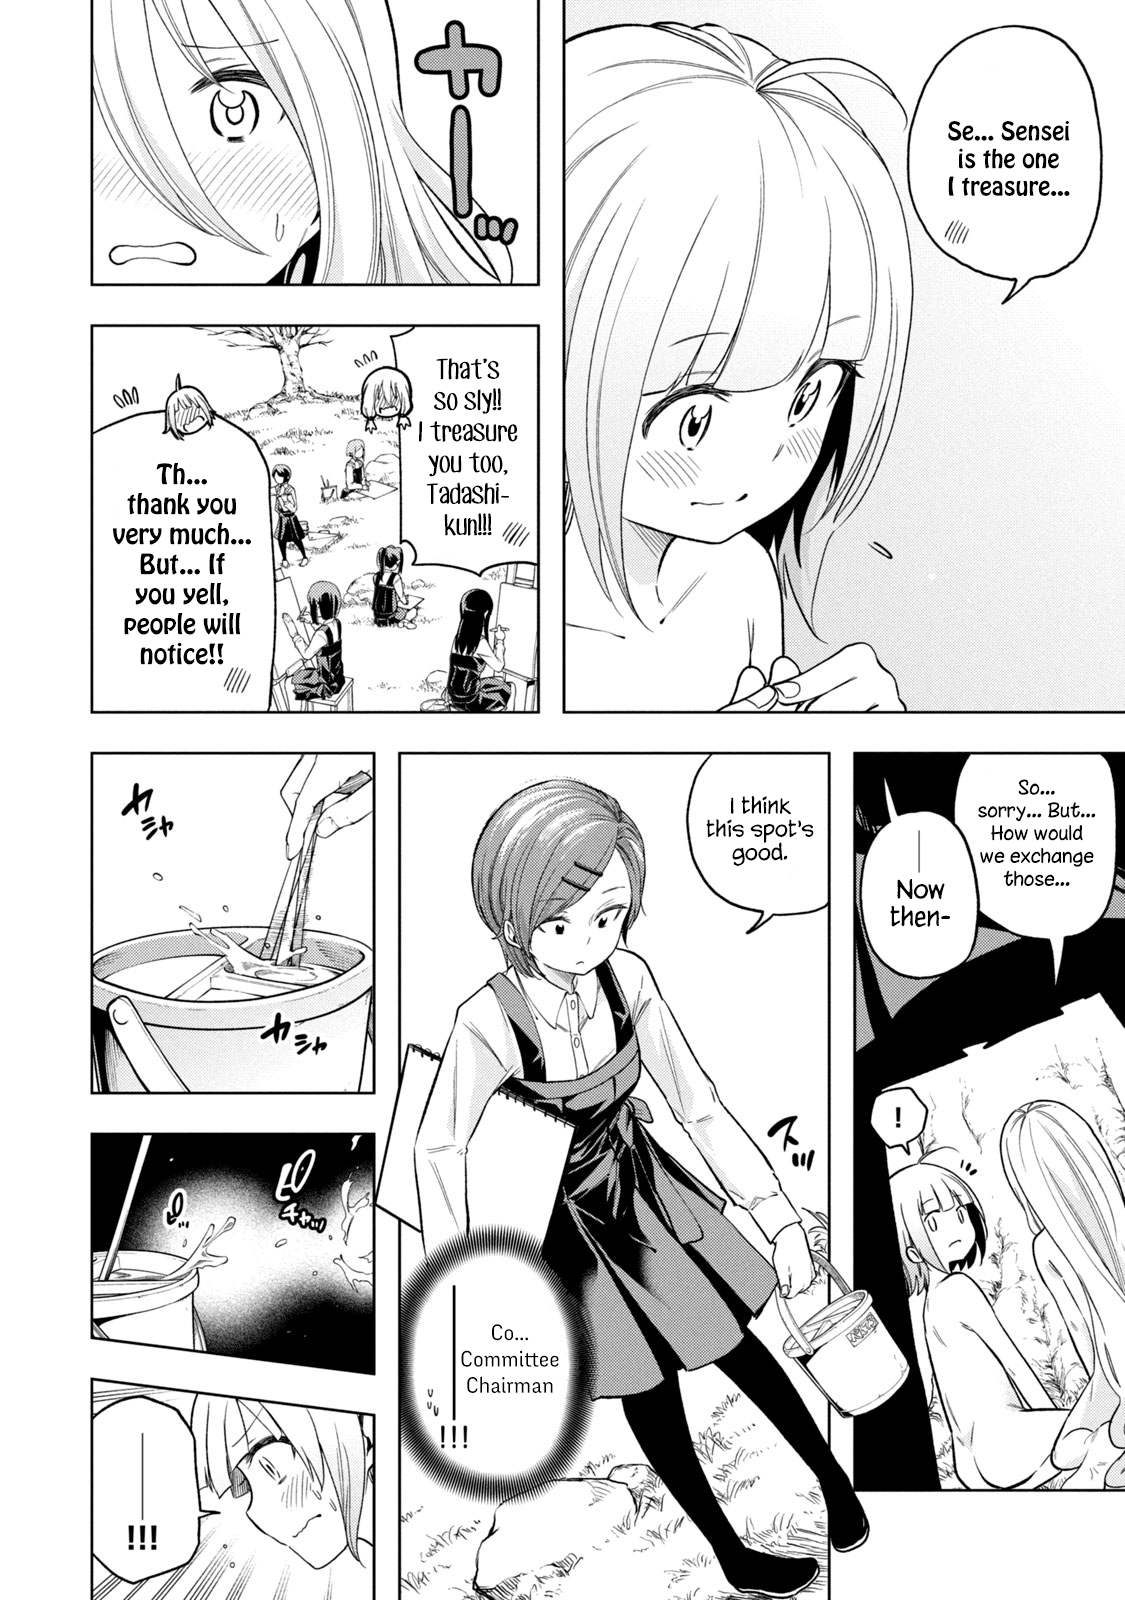 Why Are You Here Sensei!? - Page 2